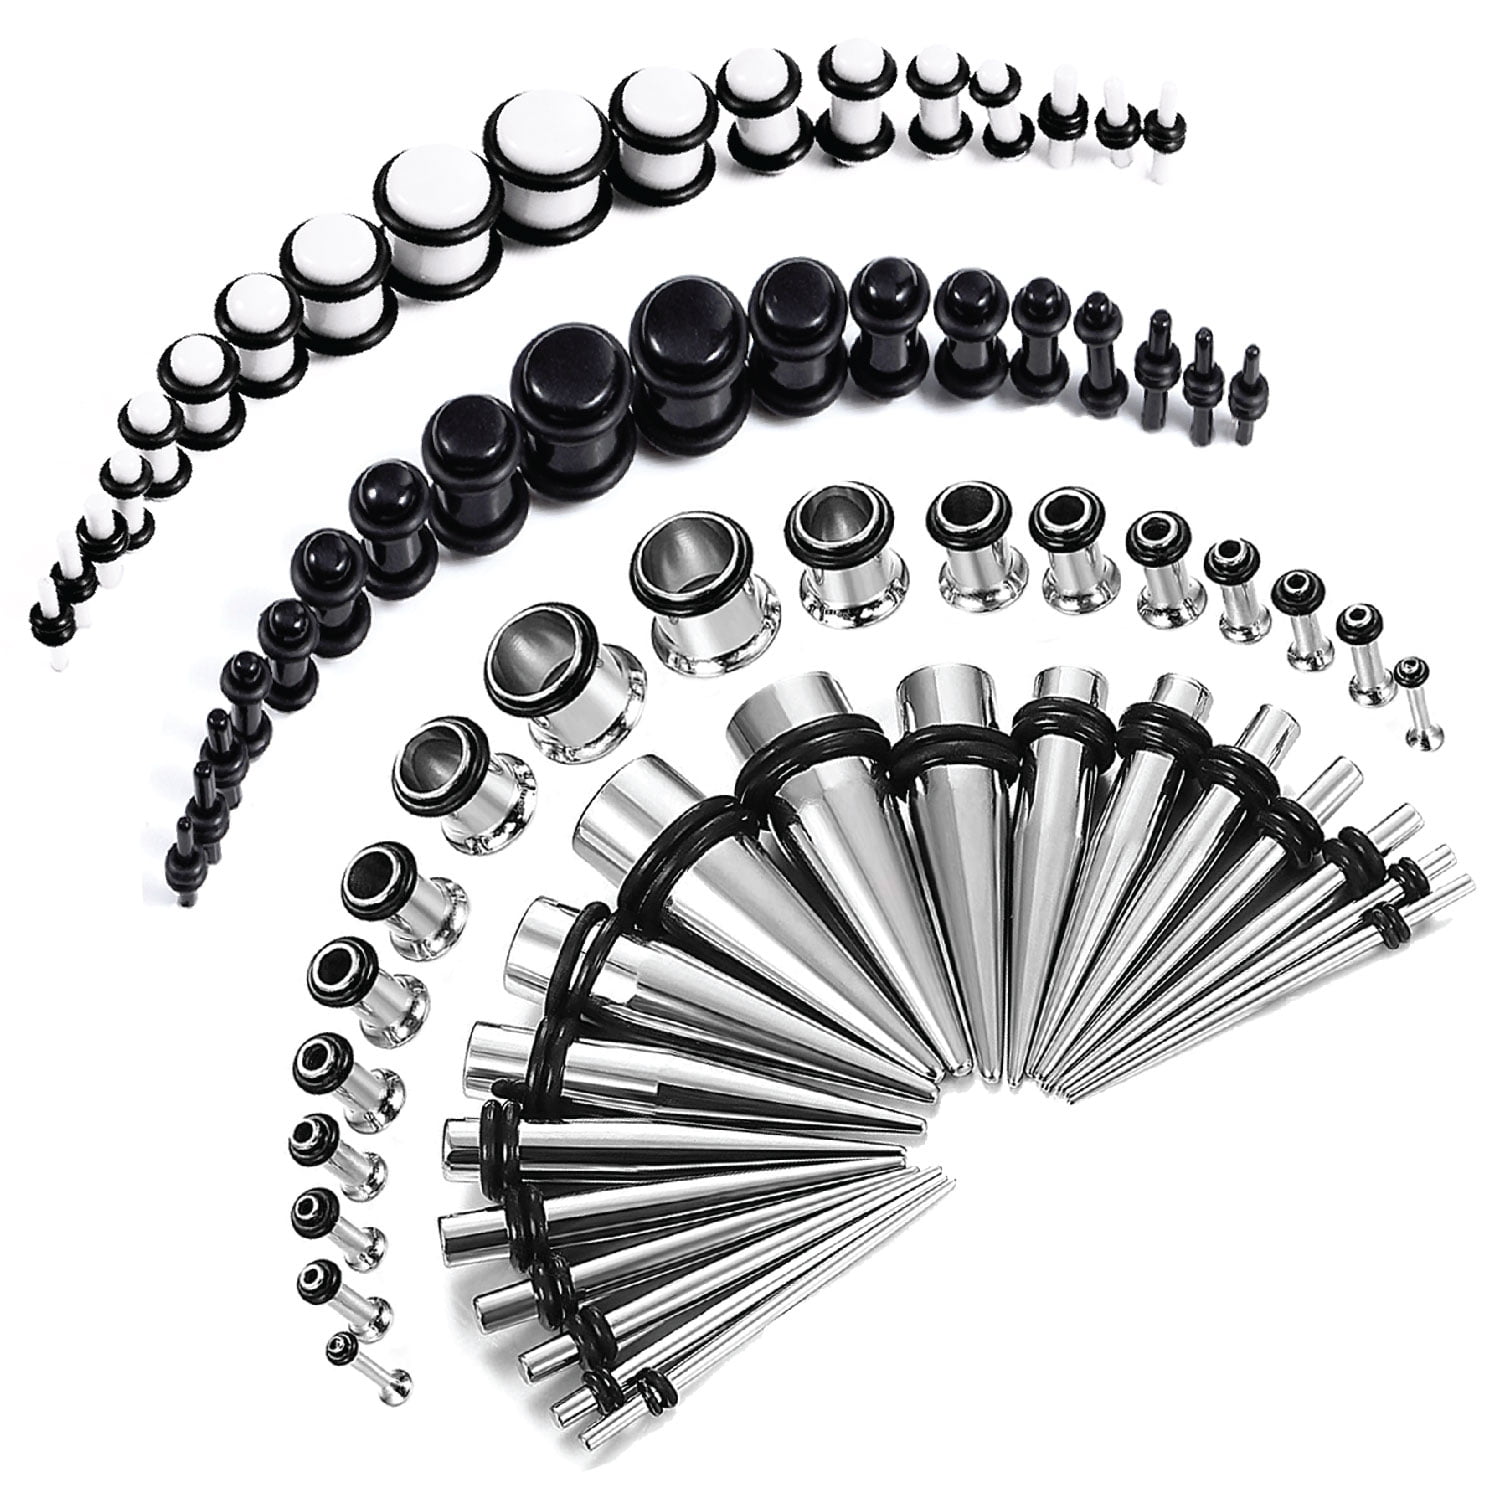 4G Ear Gauges Stretching Kit Tapers with Plugs Surgical Steel Single Flared 6G 2G Gauge Kit 9 Pieces